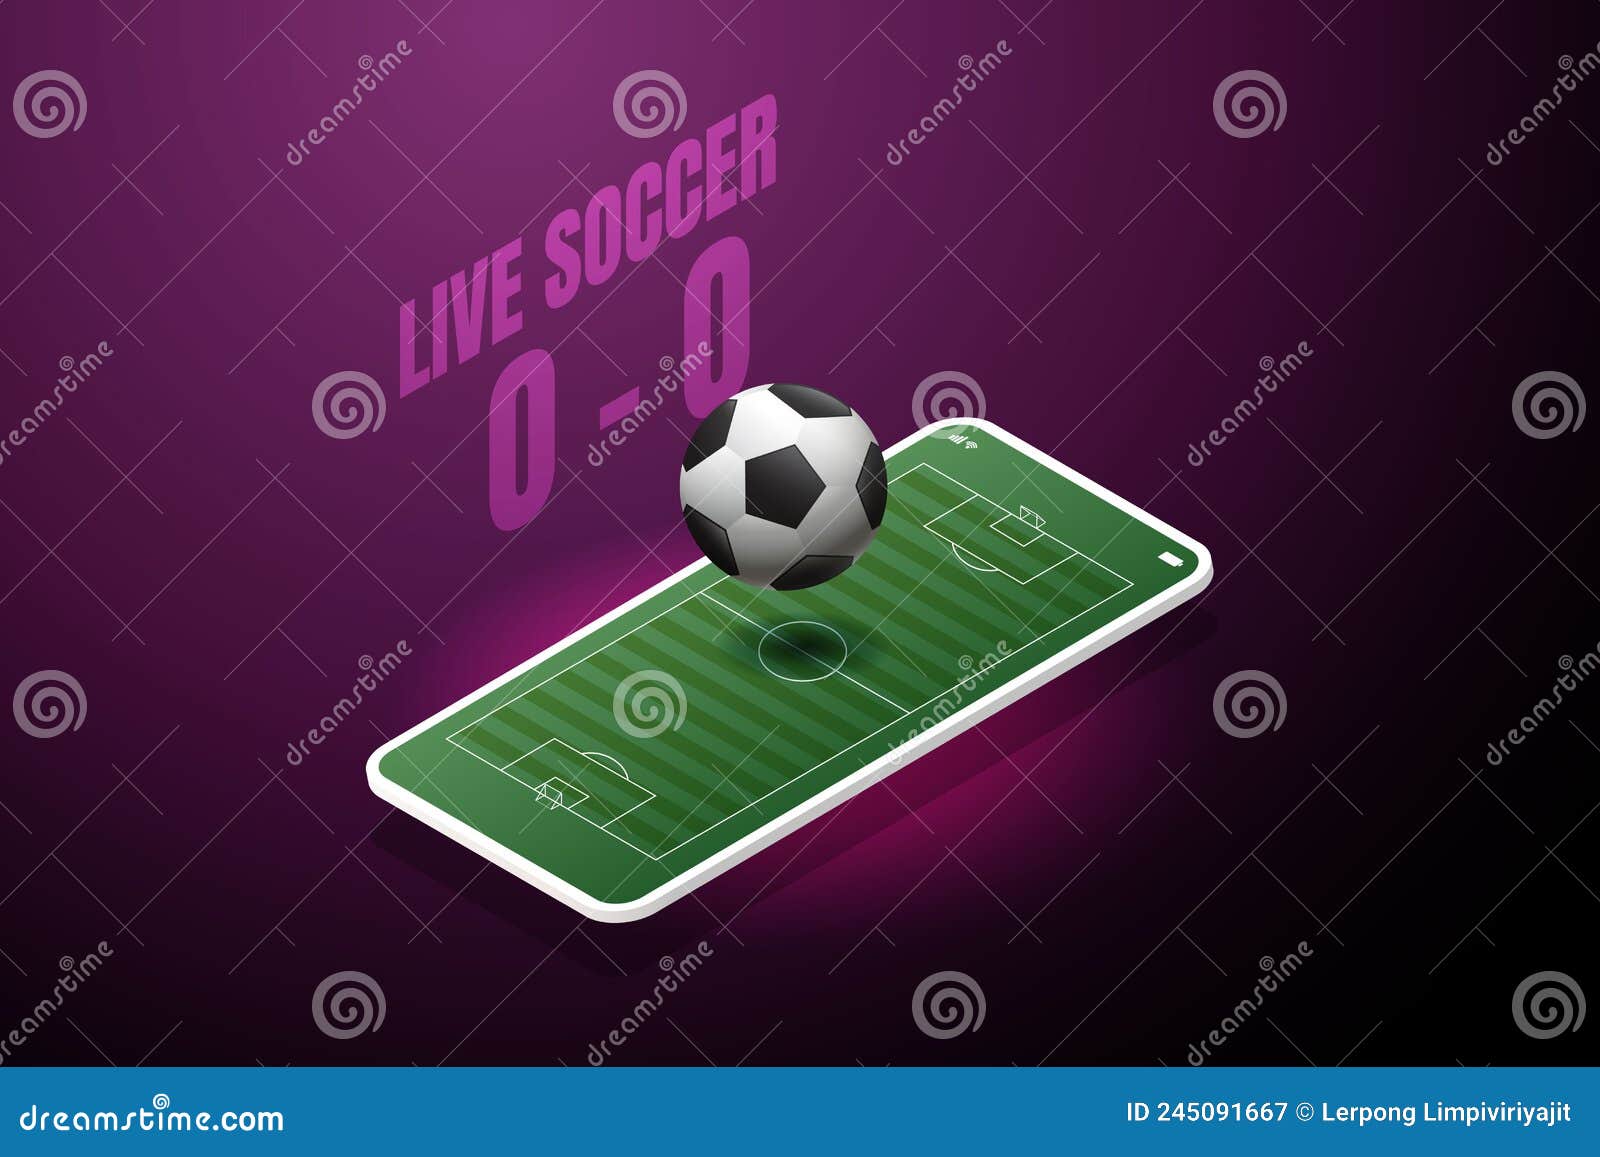 Live Football Cup Online Via Mobile Stock Vector